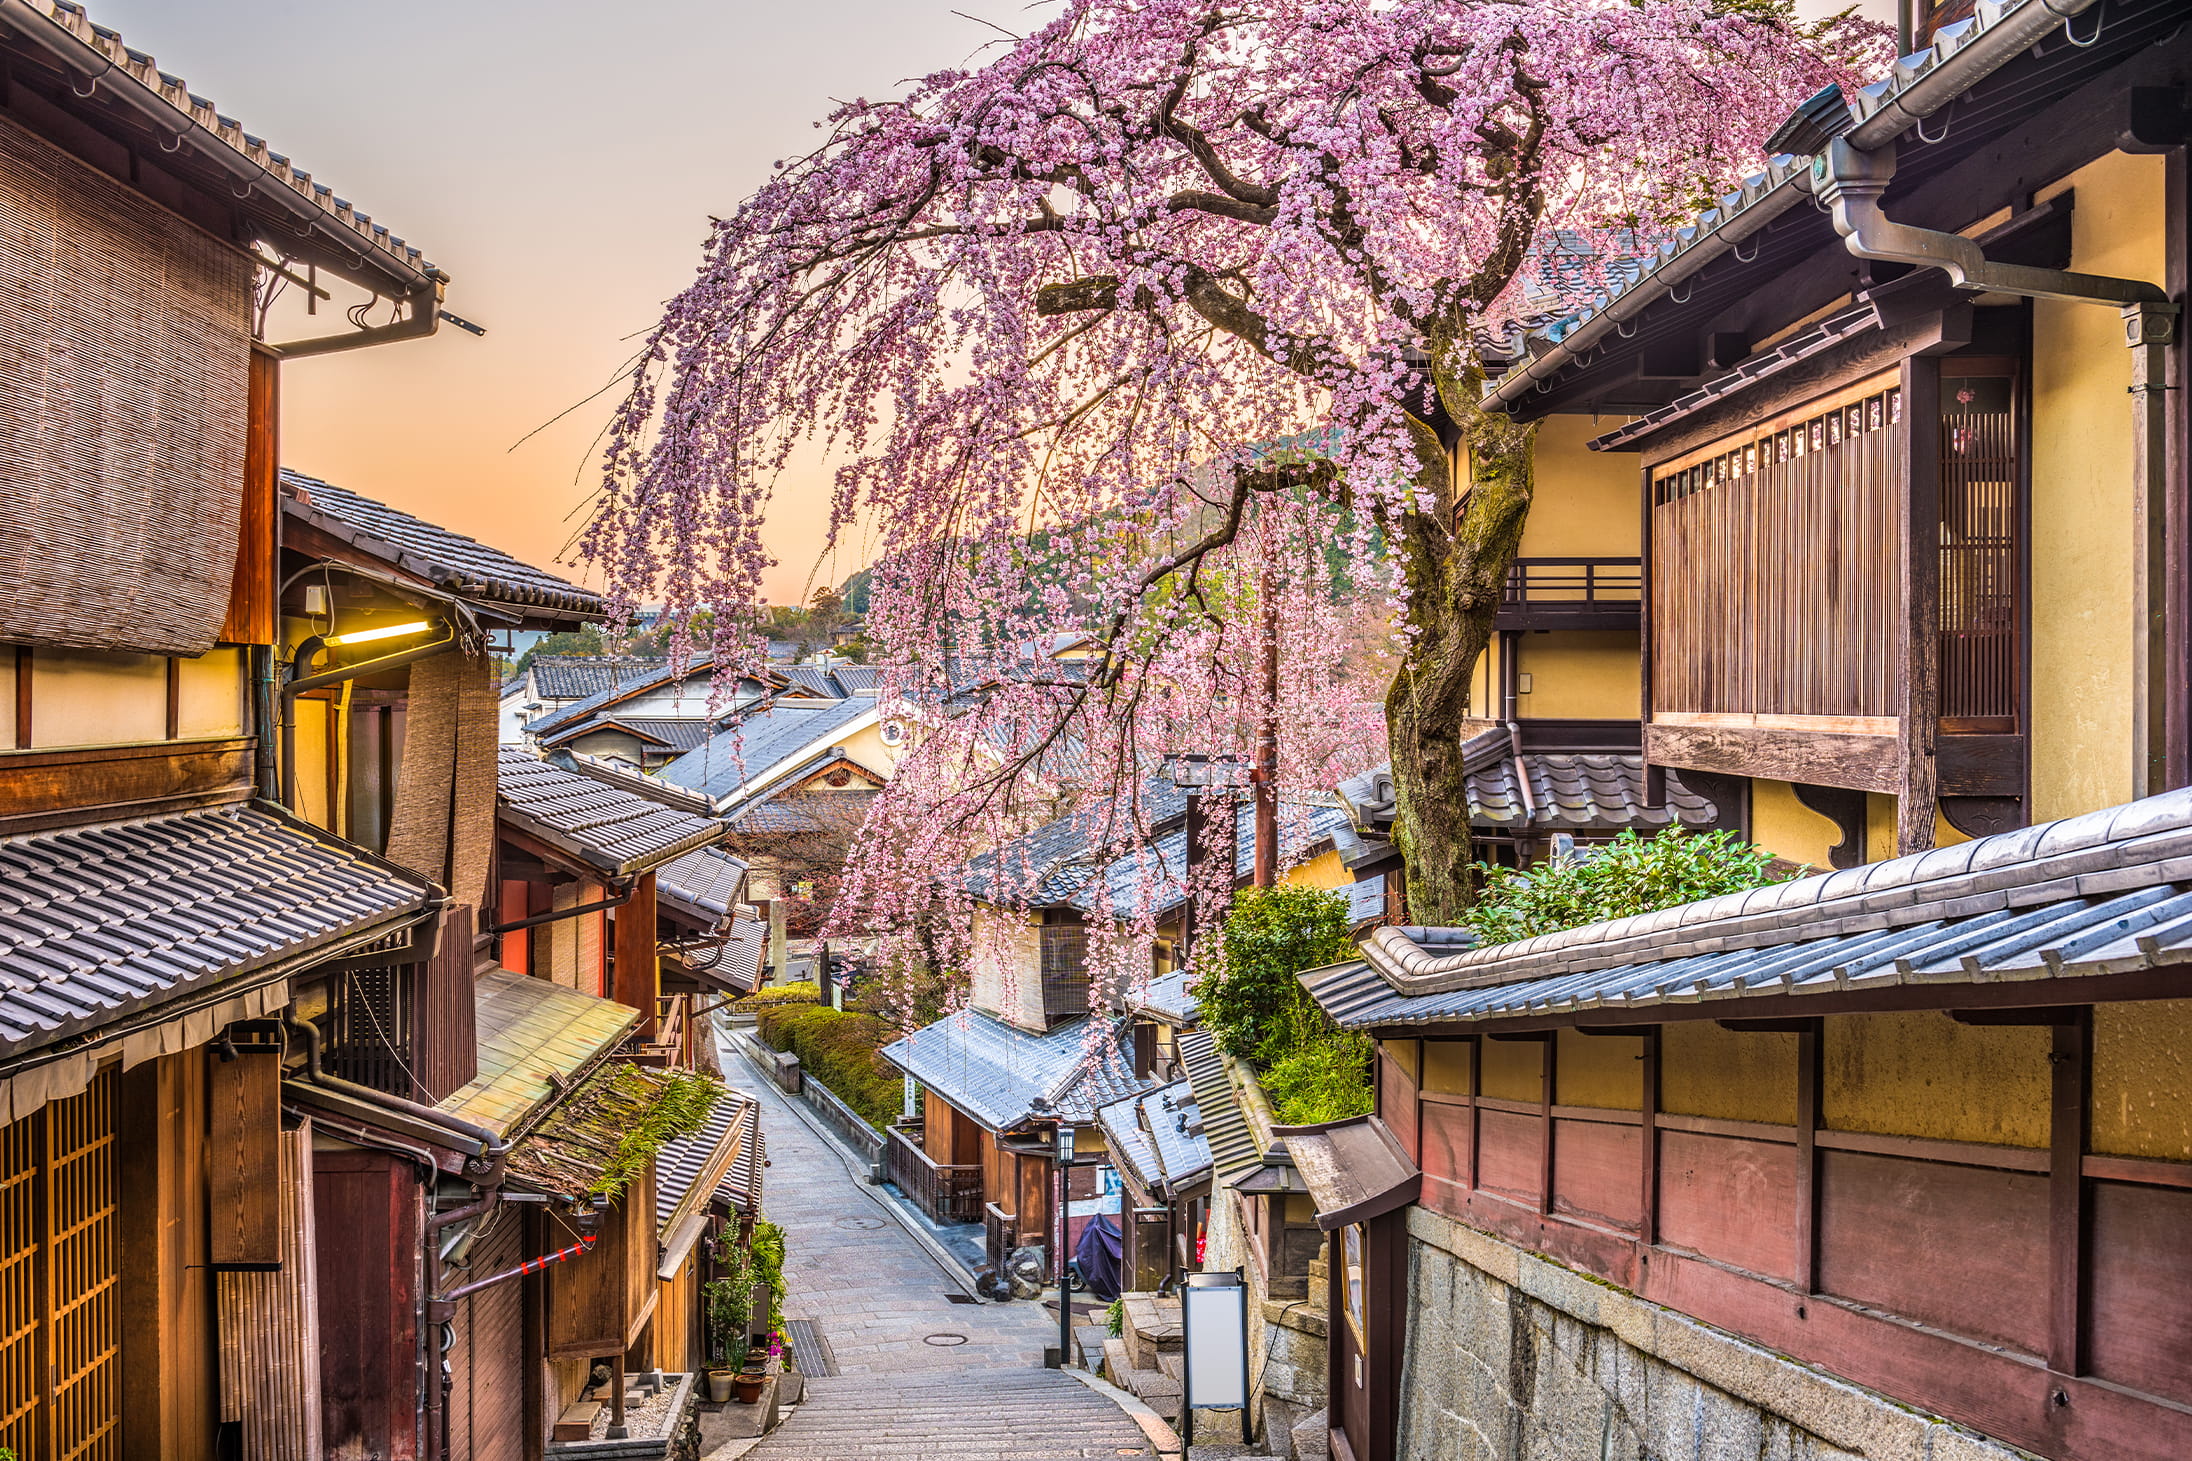 Culture trips around the world, Kyoto